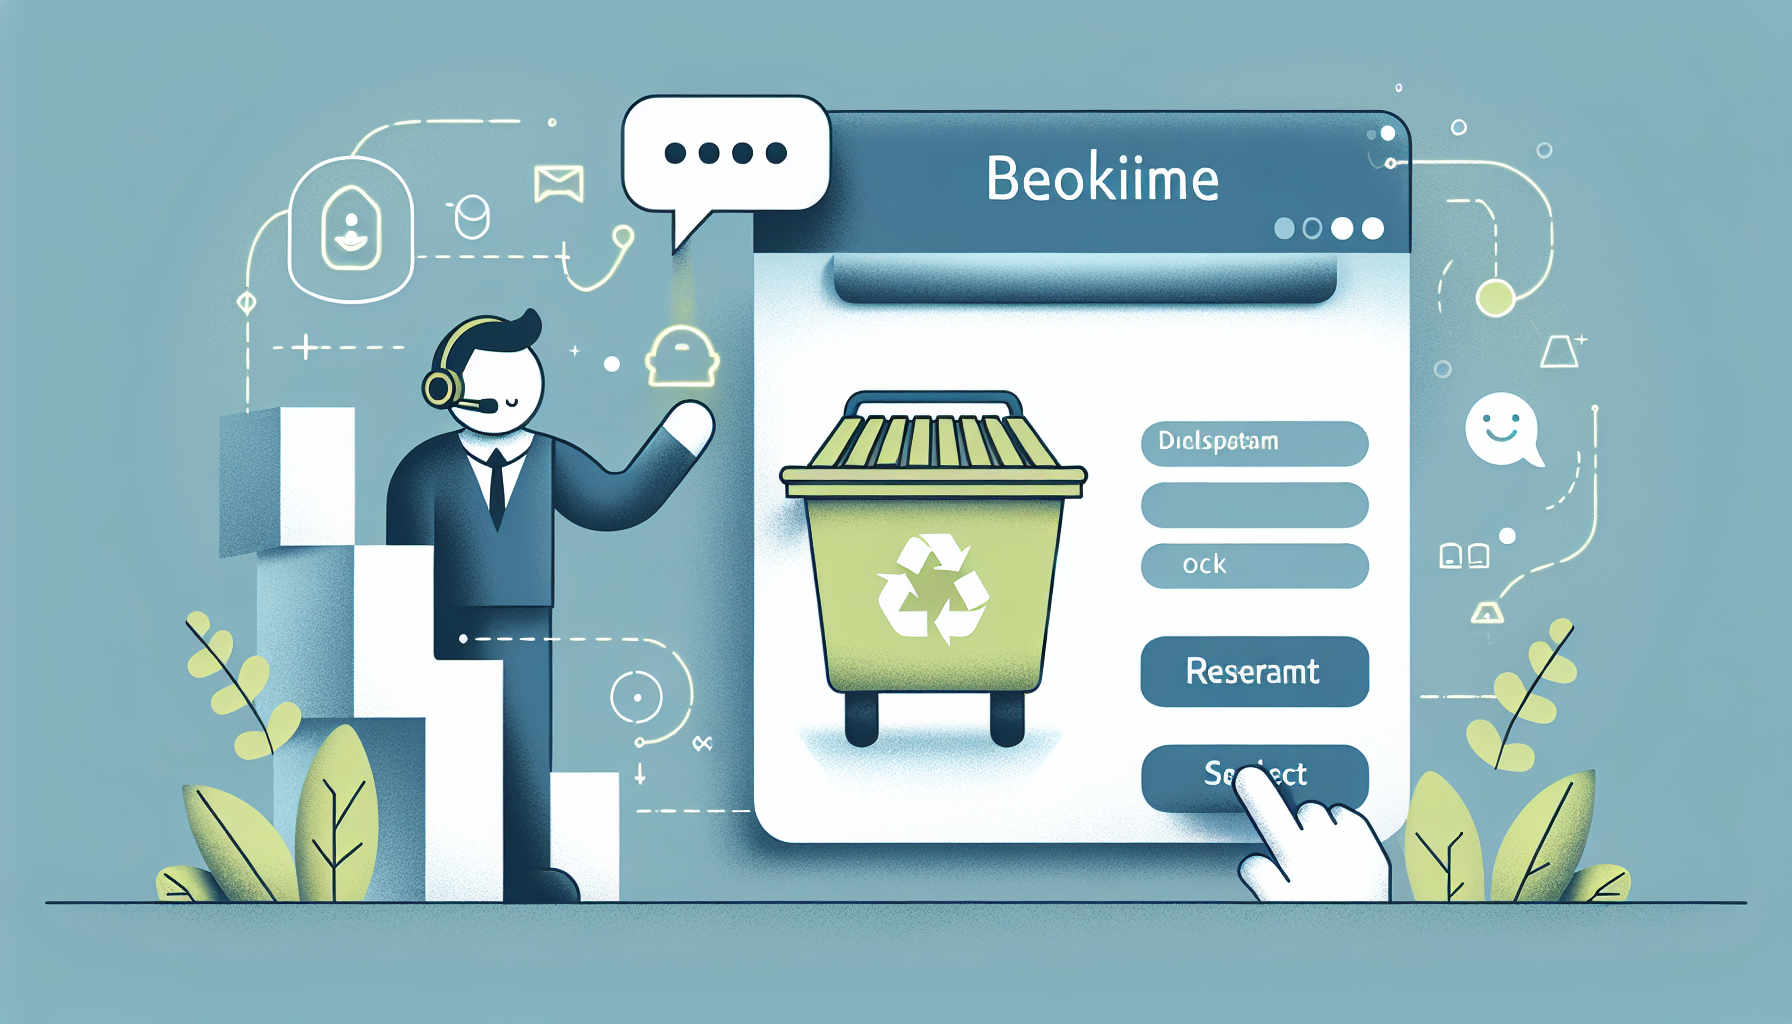 Illustration of booking a dumpster from LDR Site Services